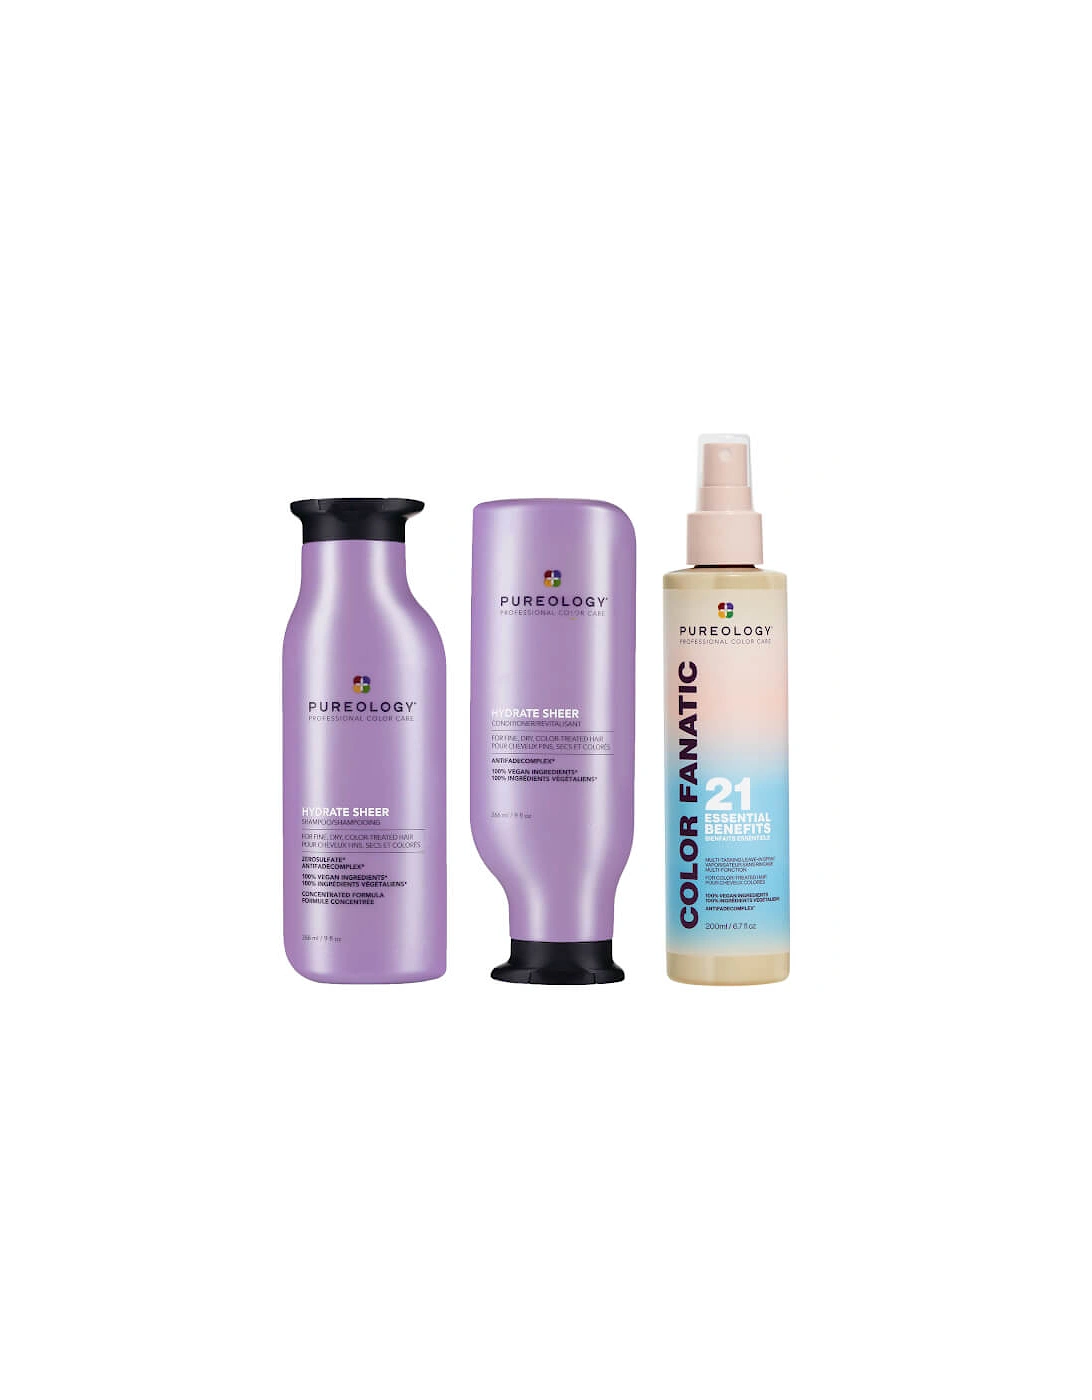 Hydrate Sheer Shampoo, Conditioner and Color Fanatic Spray Routine for Dry, Colour Treated Hair, 2 of 1